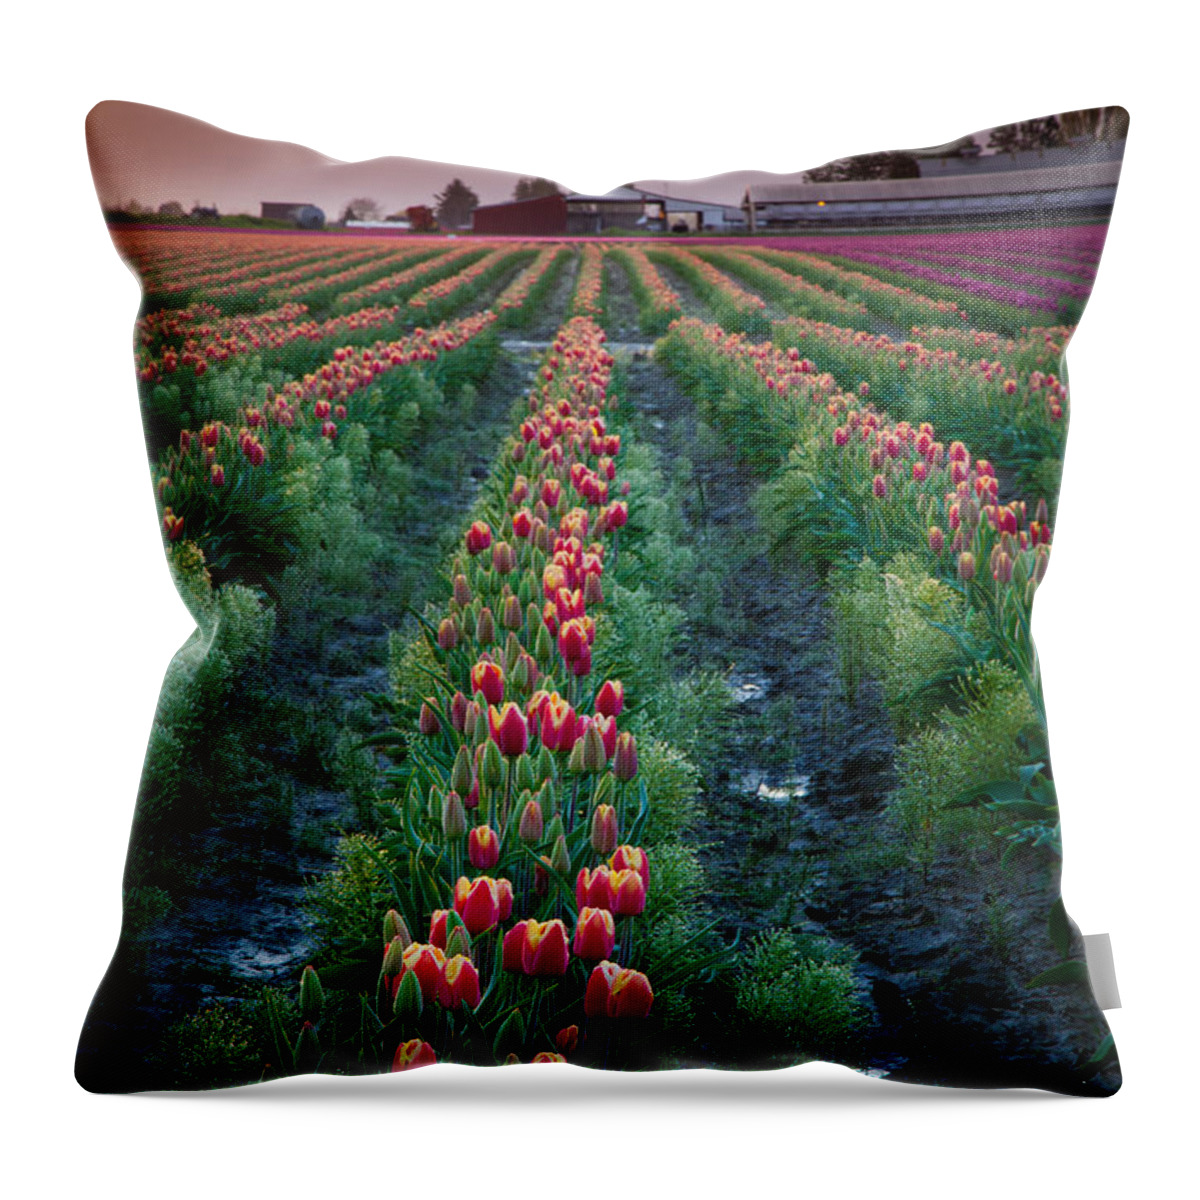 America Throw Pillow featuring the photograph Skagit Valley Magic by Inge Johnsson